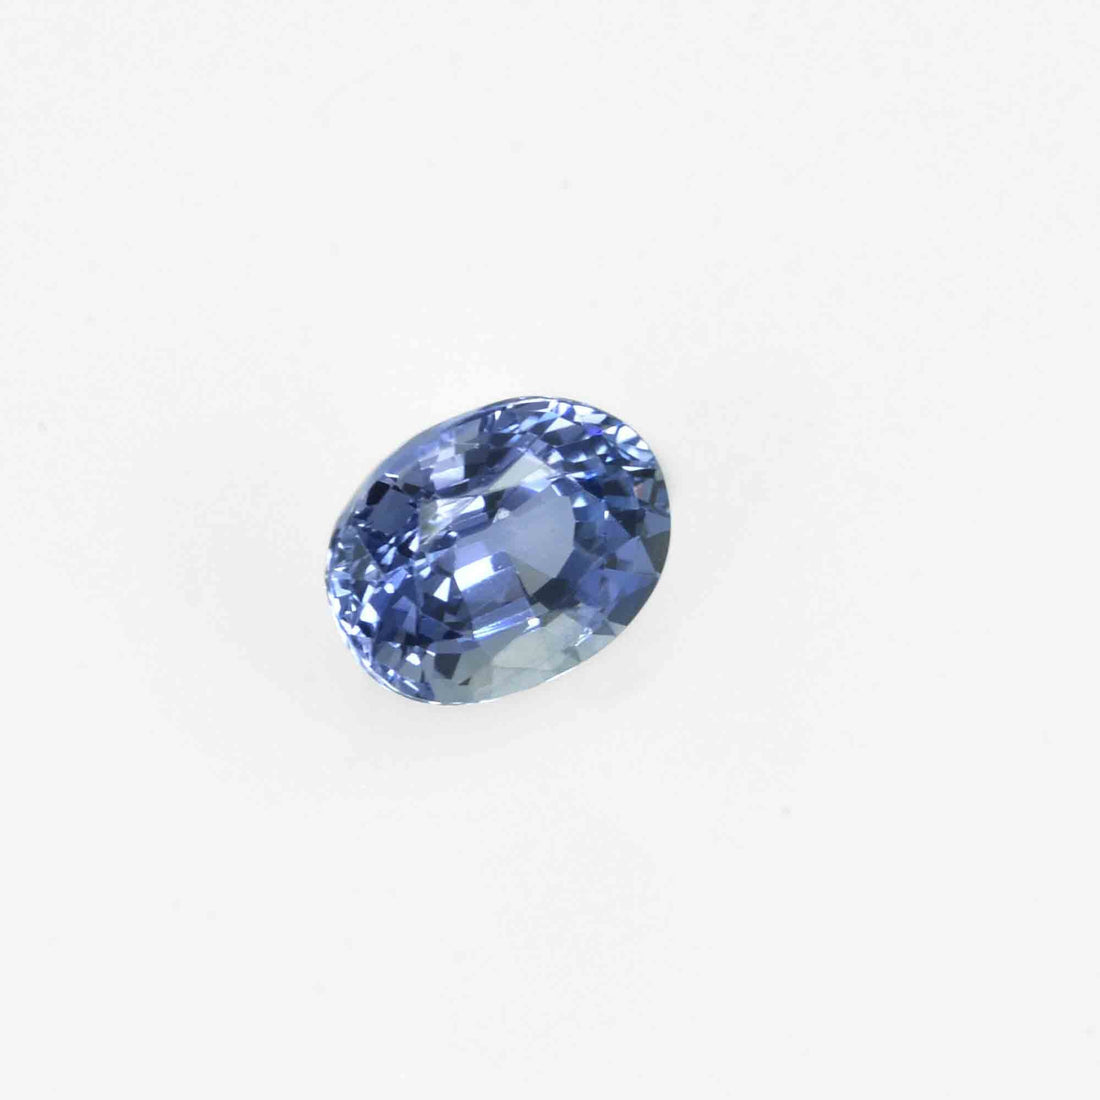 1.90 Cts Natural Fancy Sapphire Loose Gemstone Oval Cut